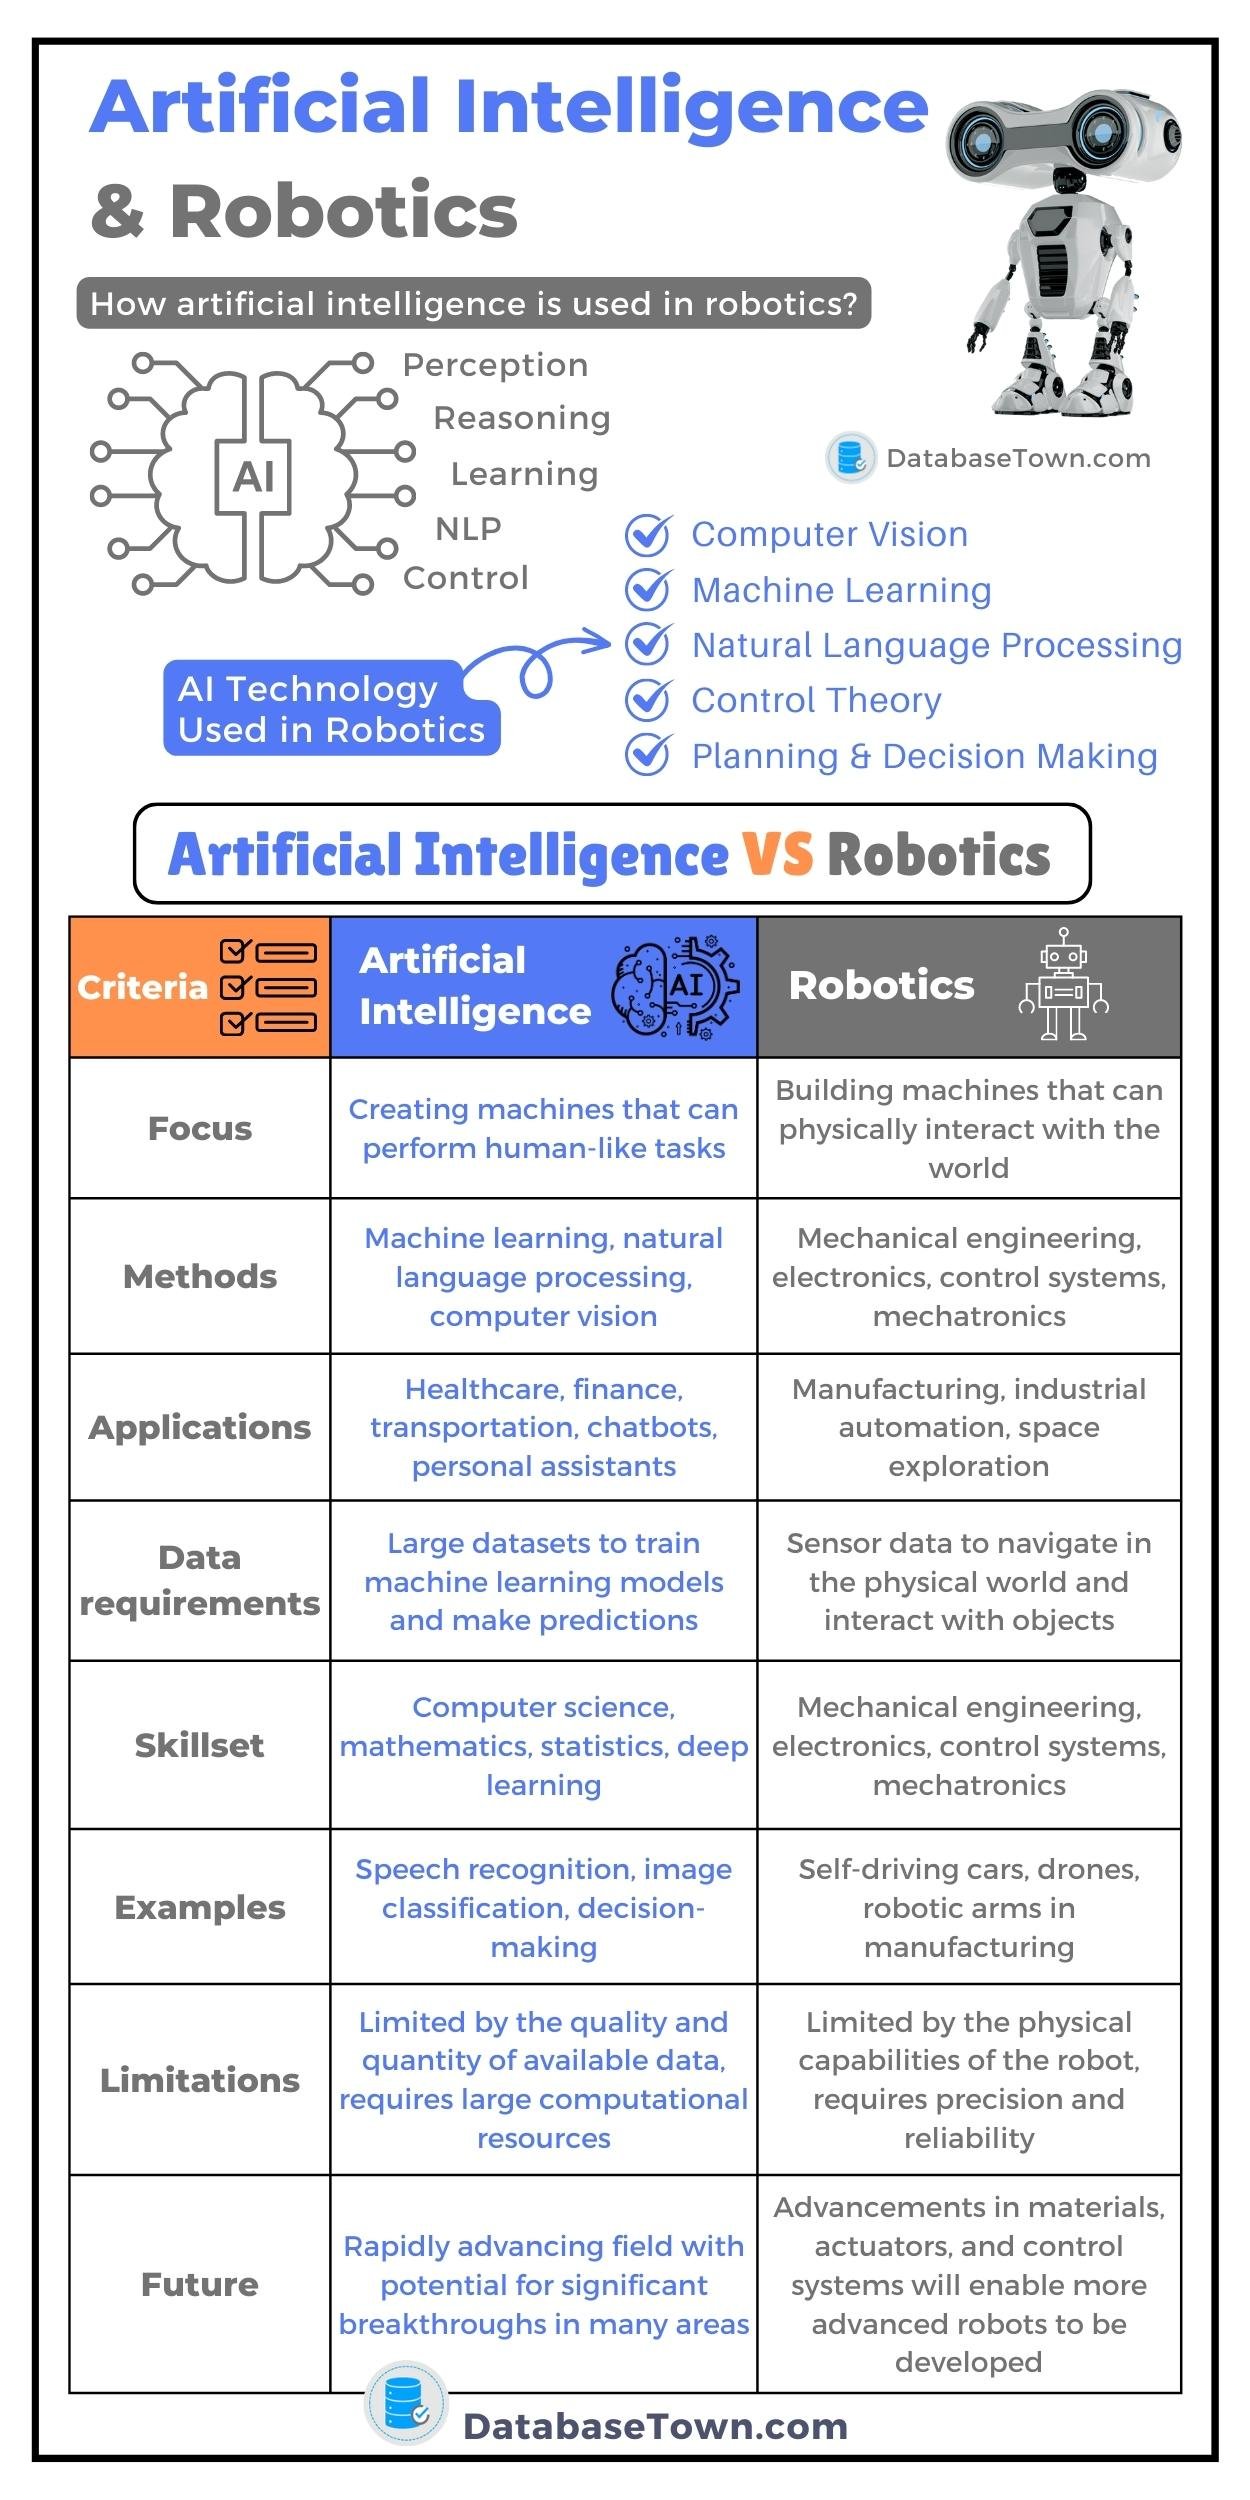 Artificial Intelligence and Robotics (Relationship, Differences & Examples)